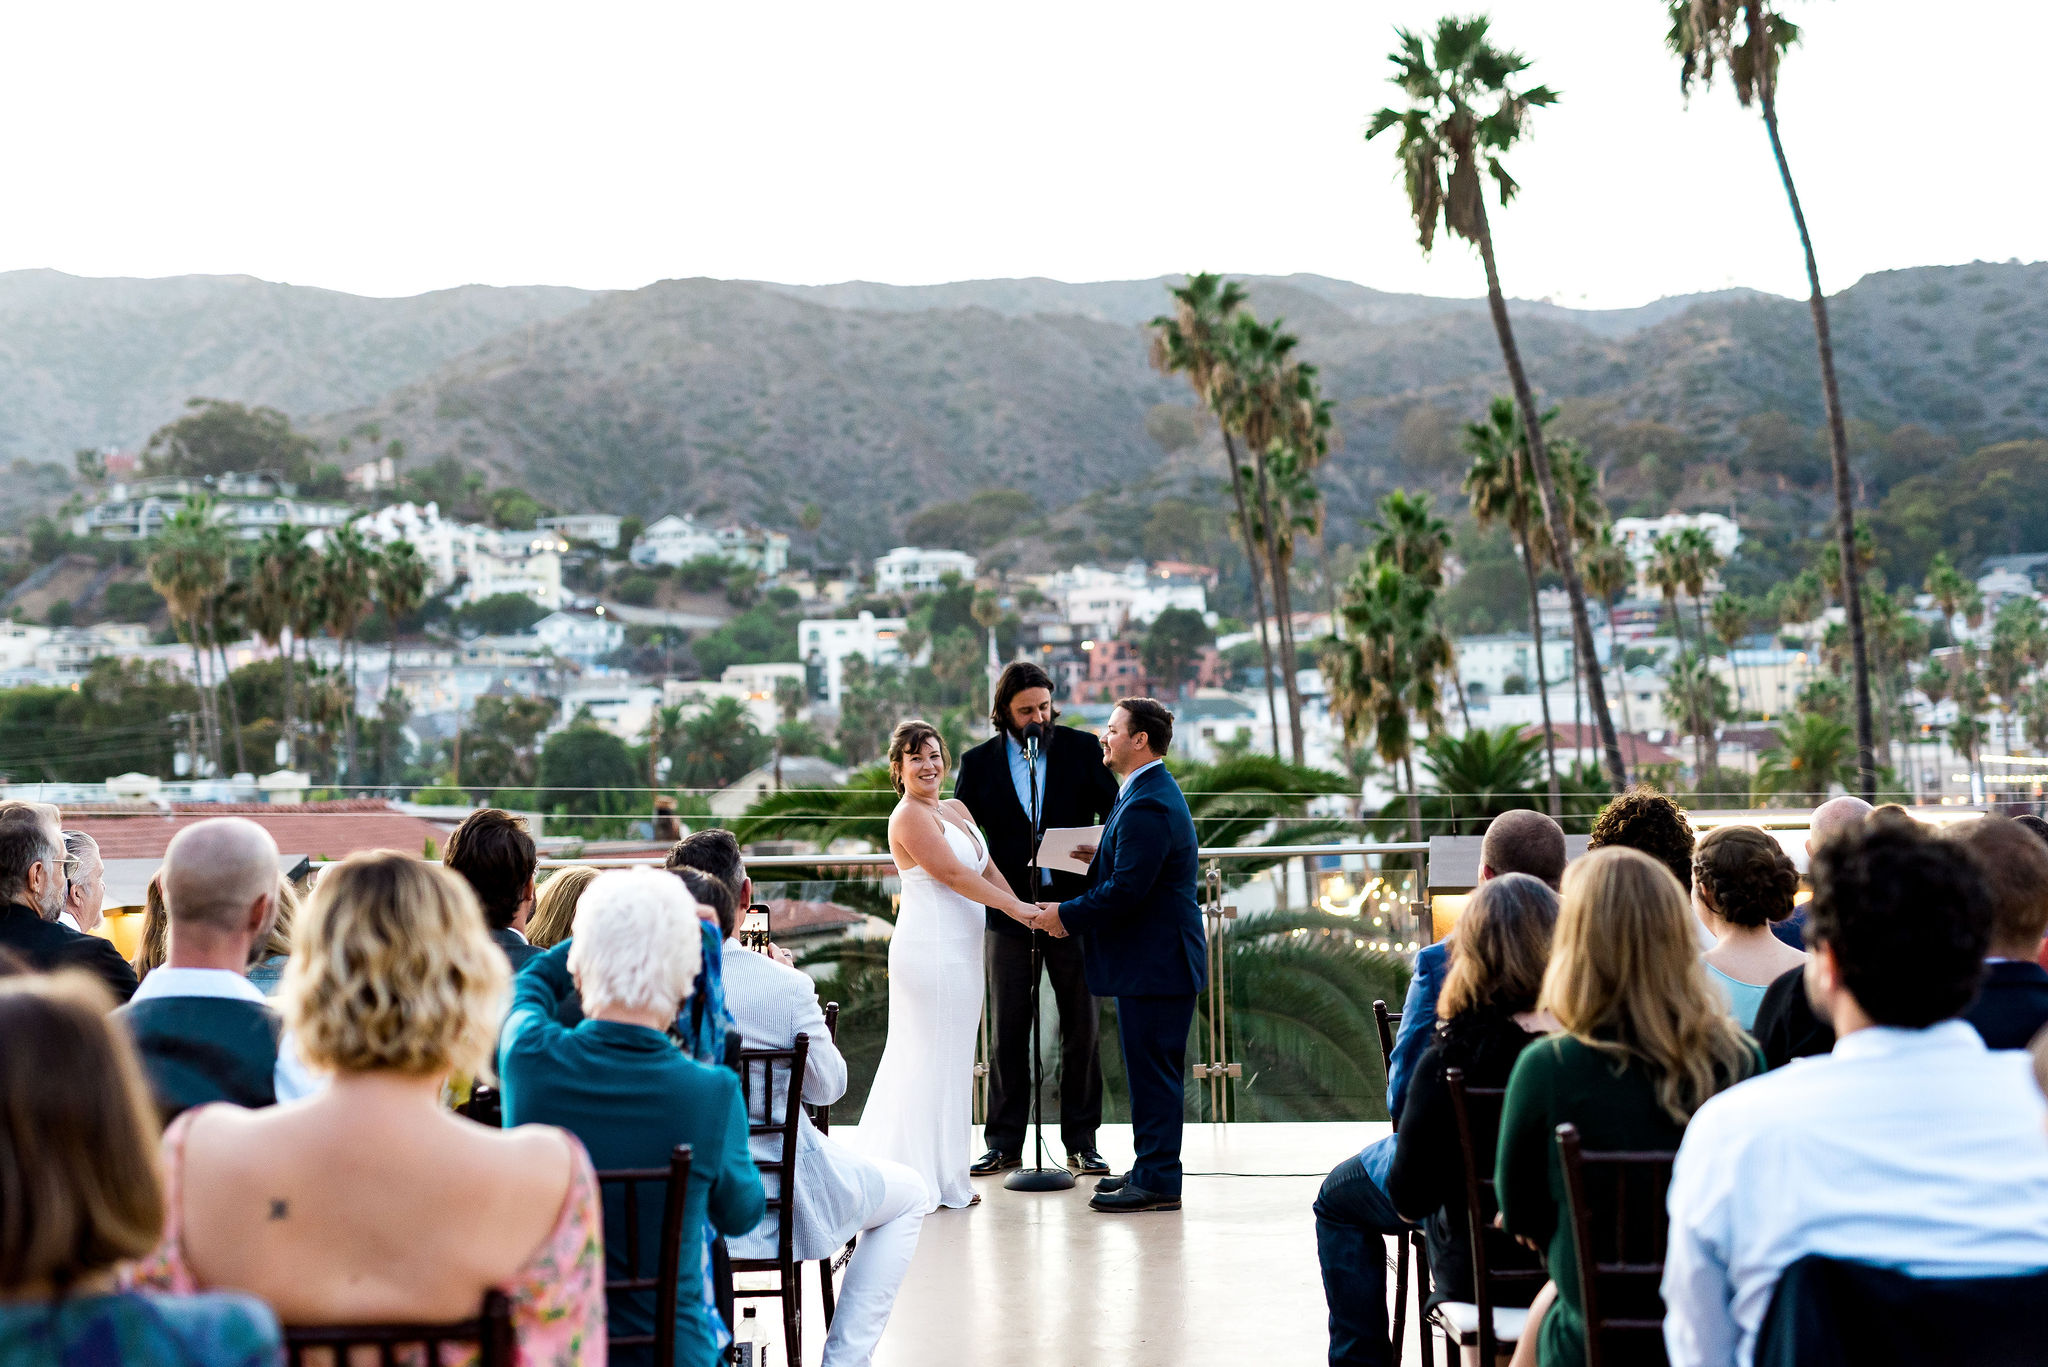 Best Wedding Destination locations in the United States